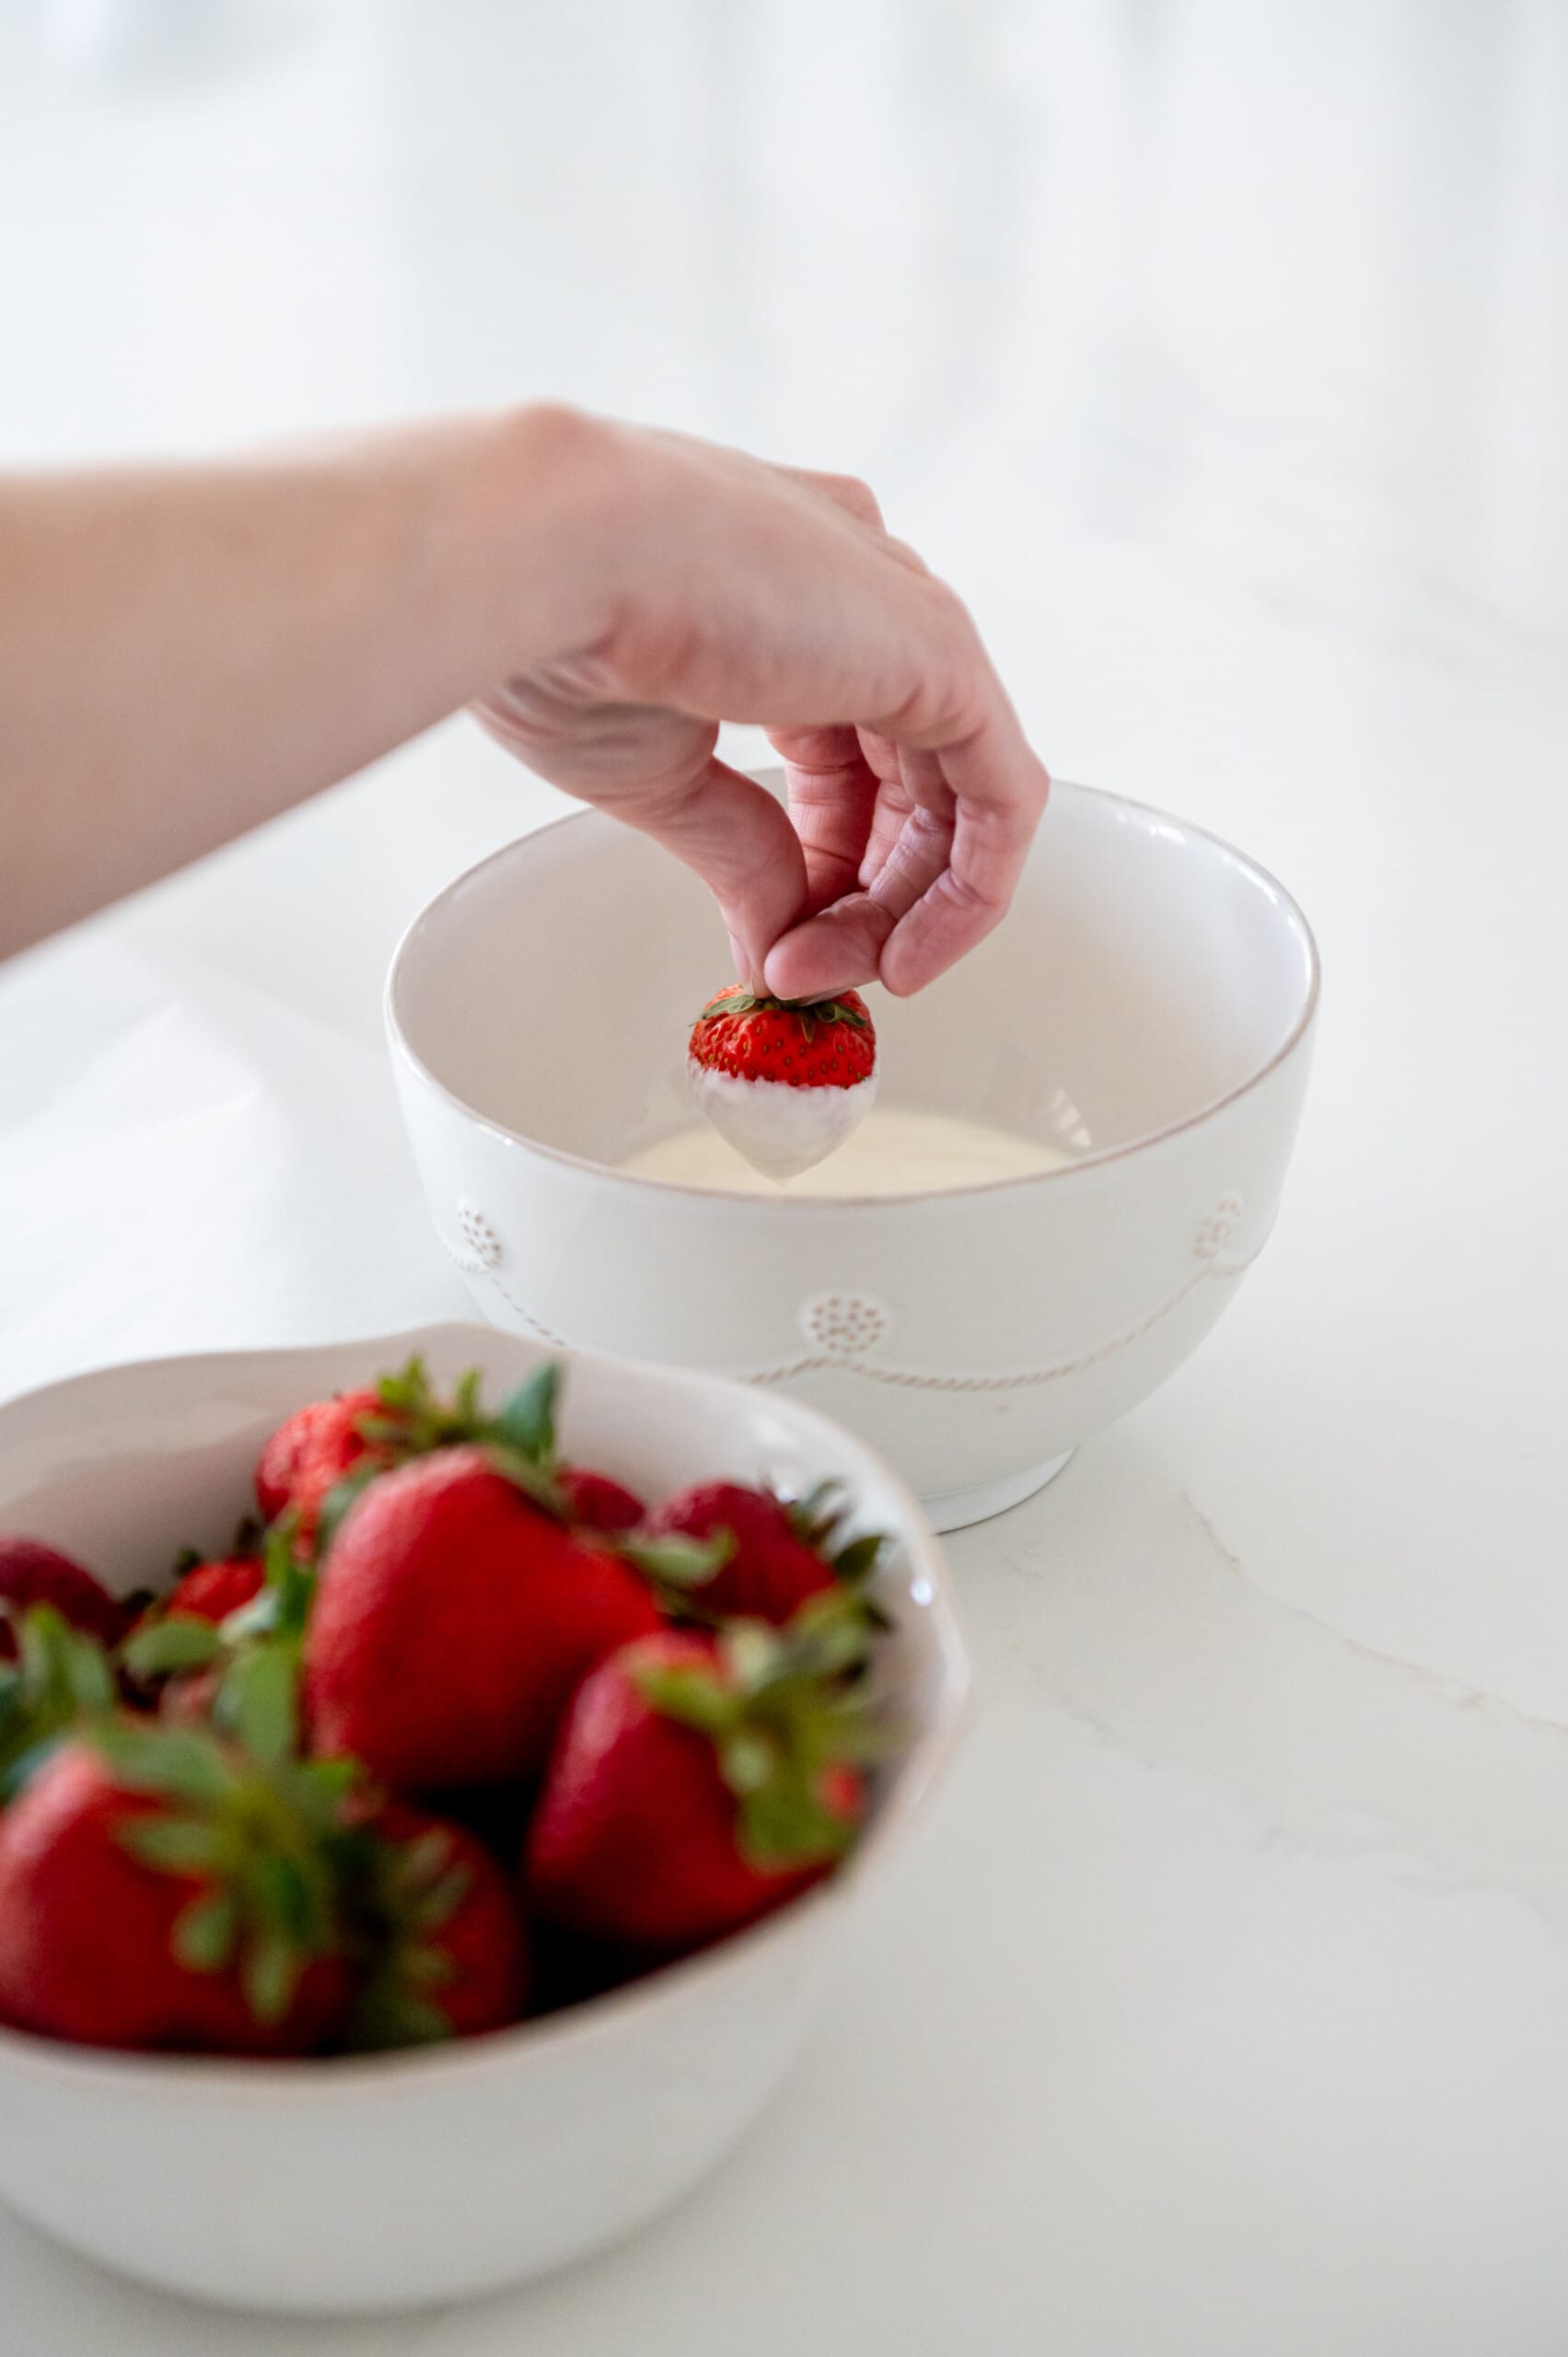 Hand dipping a strawberry into a white bowl of Stonyfield plain yogurt